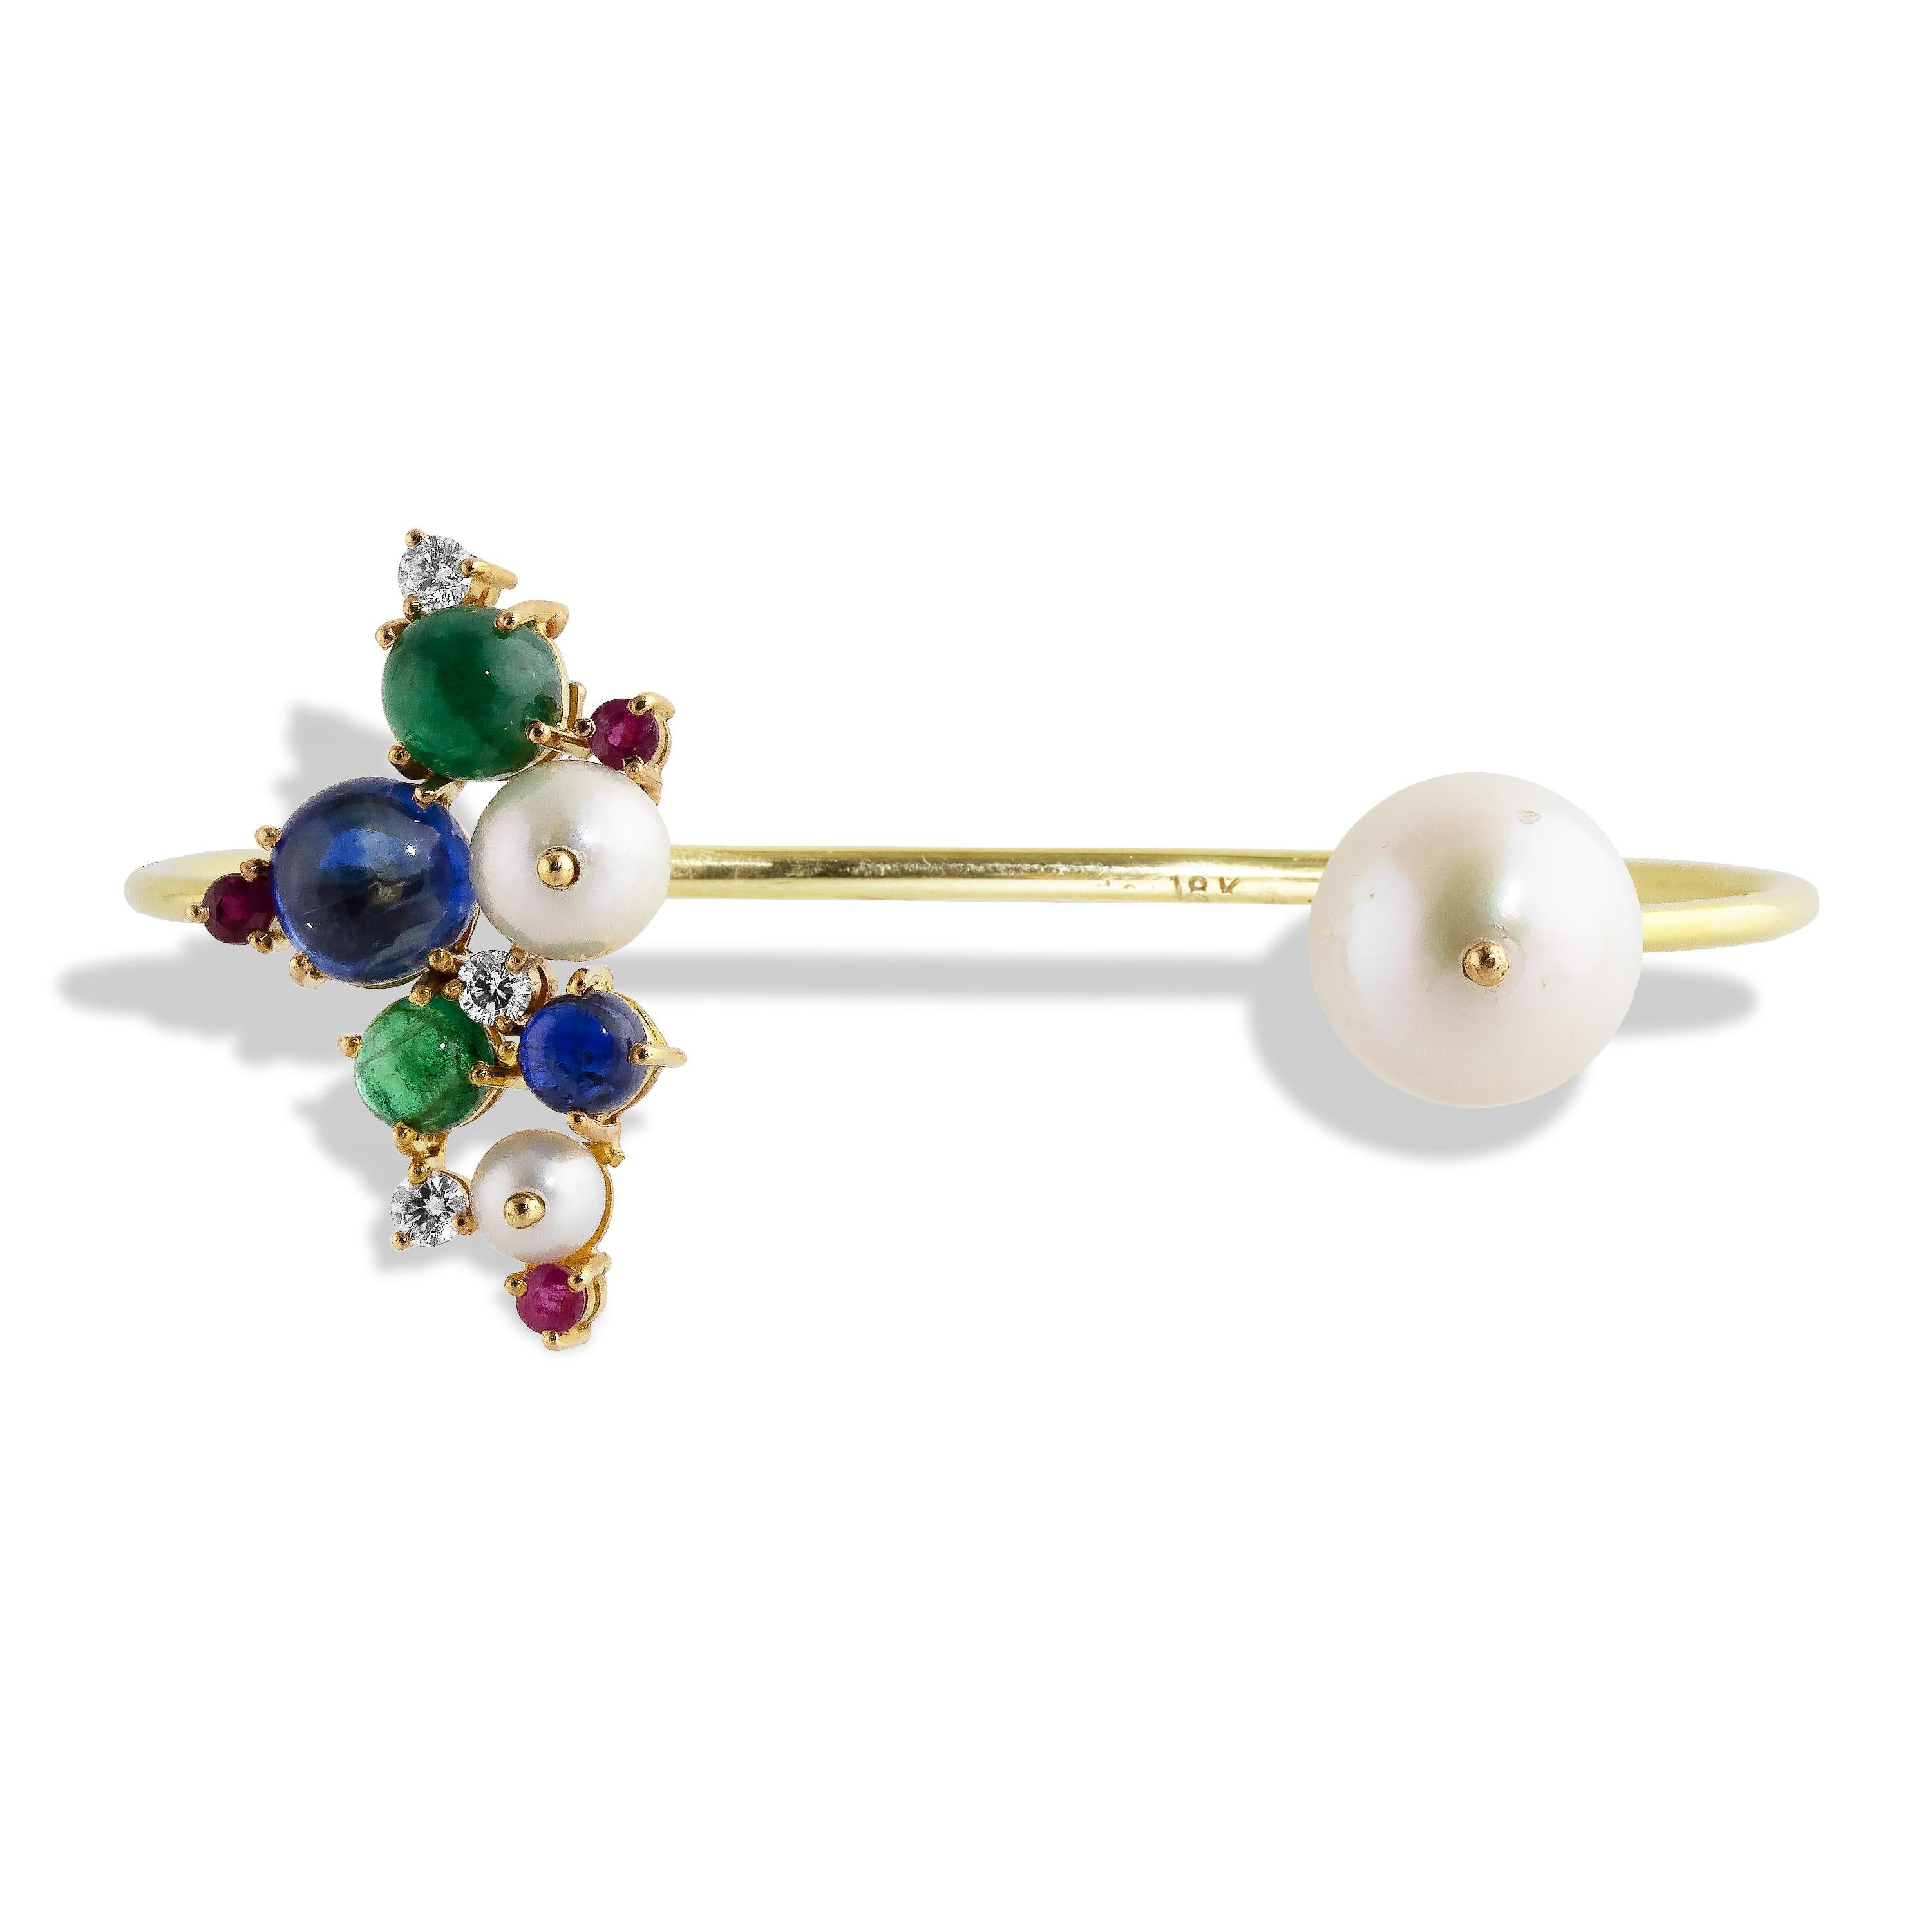 A cluster of Tanzanite, Emerald cabochons with Rubies, Diamonds and Pearls form a cluster open cuff bracelet set in 18k yellow gold.  One side features an 11mm Fresh Water Pearl, the cluster features an 8mm and 5mm Tanzanite Cabochon, 6.5mm and 5mm